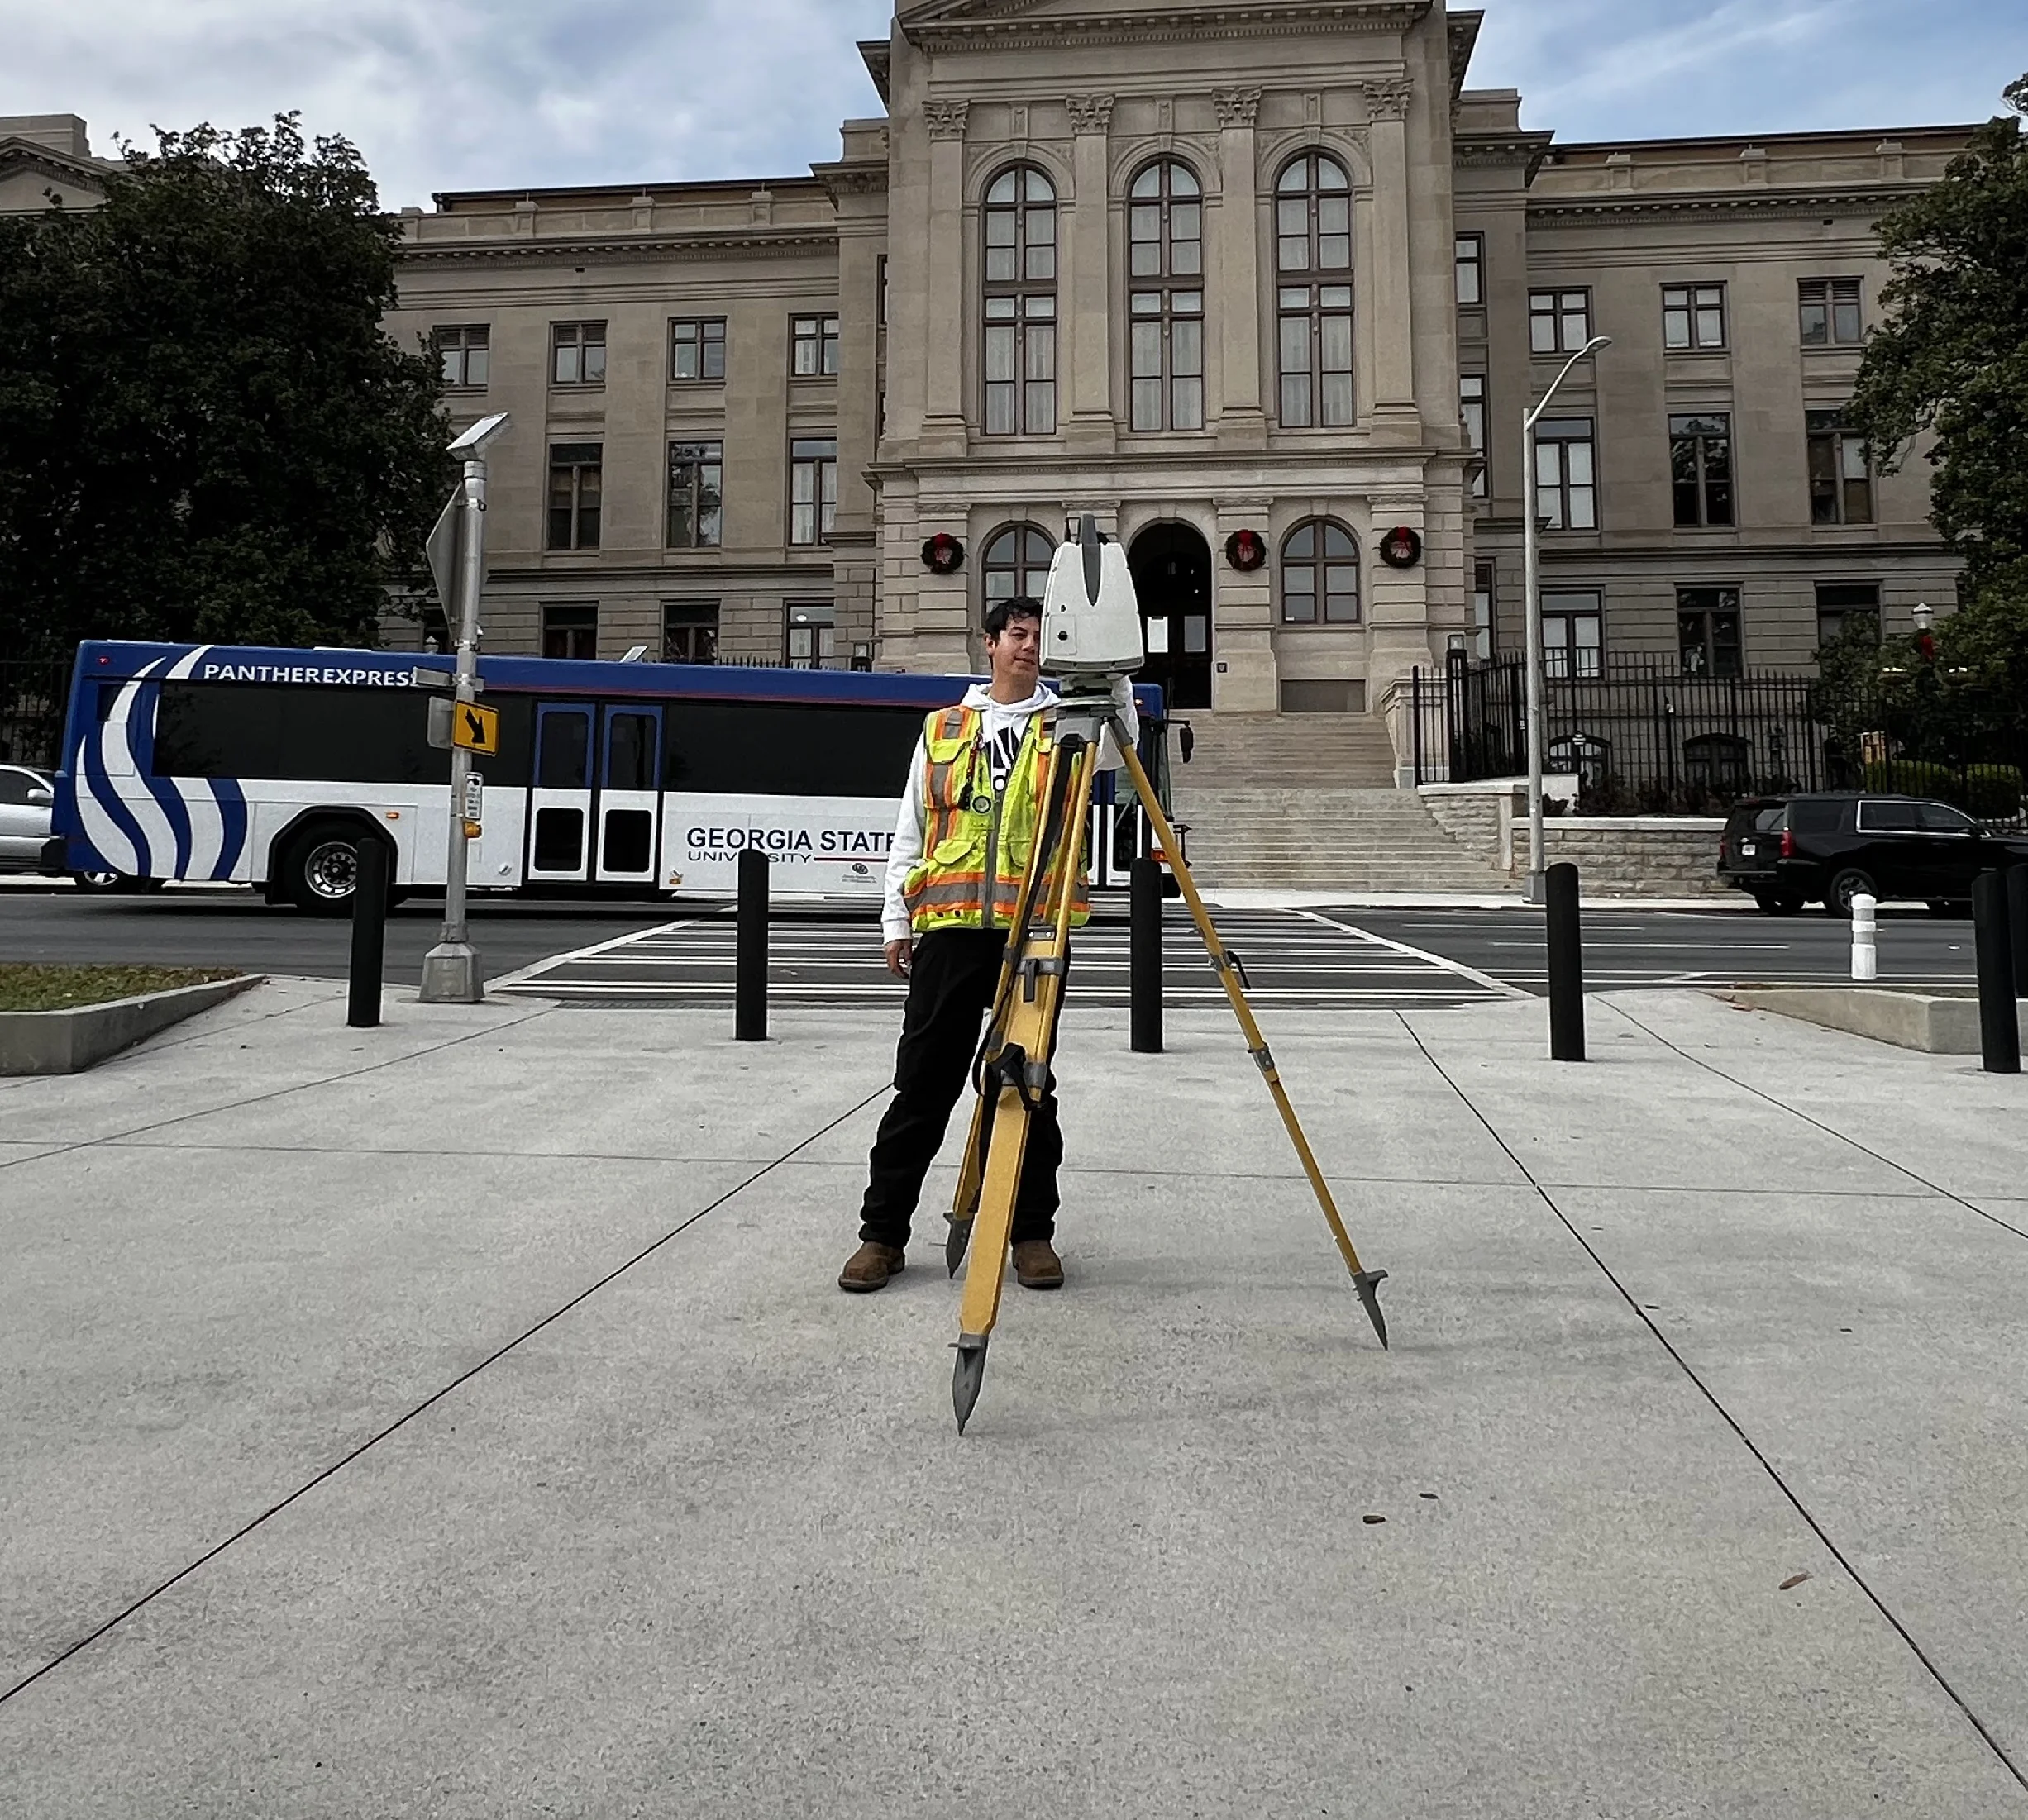 Surveyor standing behind a survey mapping camera on a city sidewalk. Behind them, a city bus passes and a large city building can be seen.